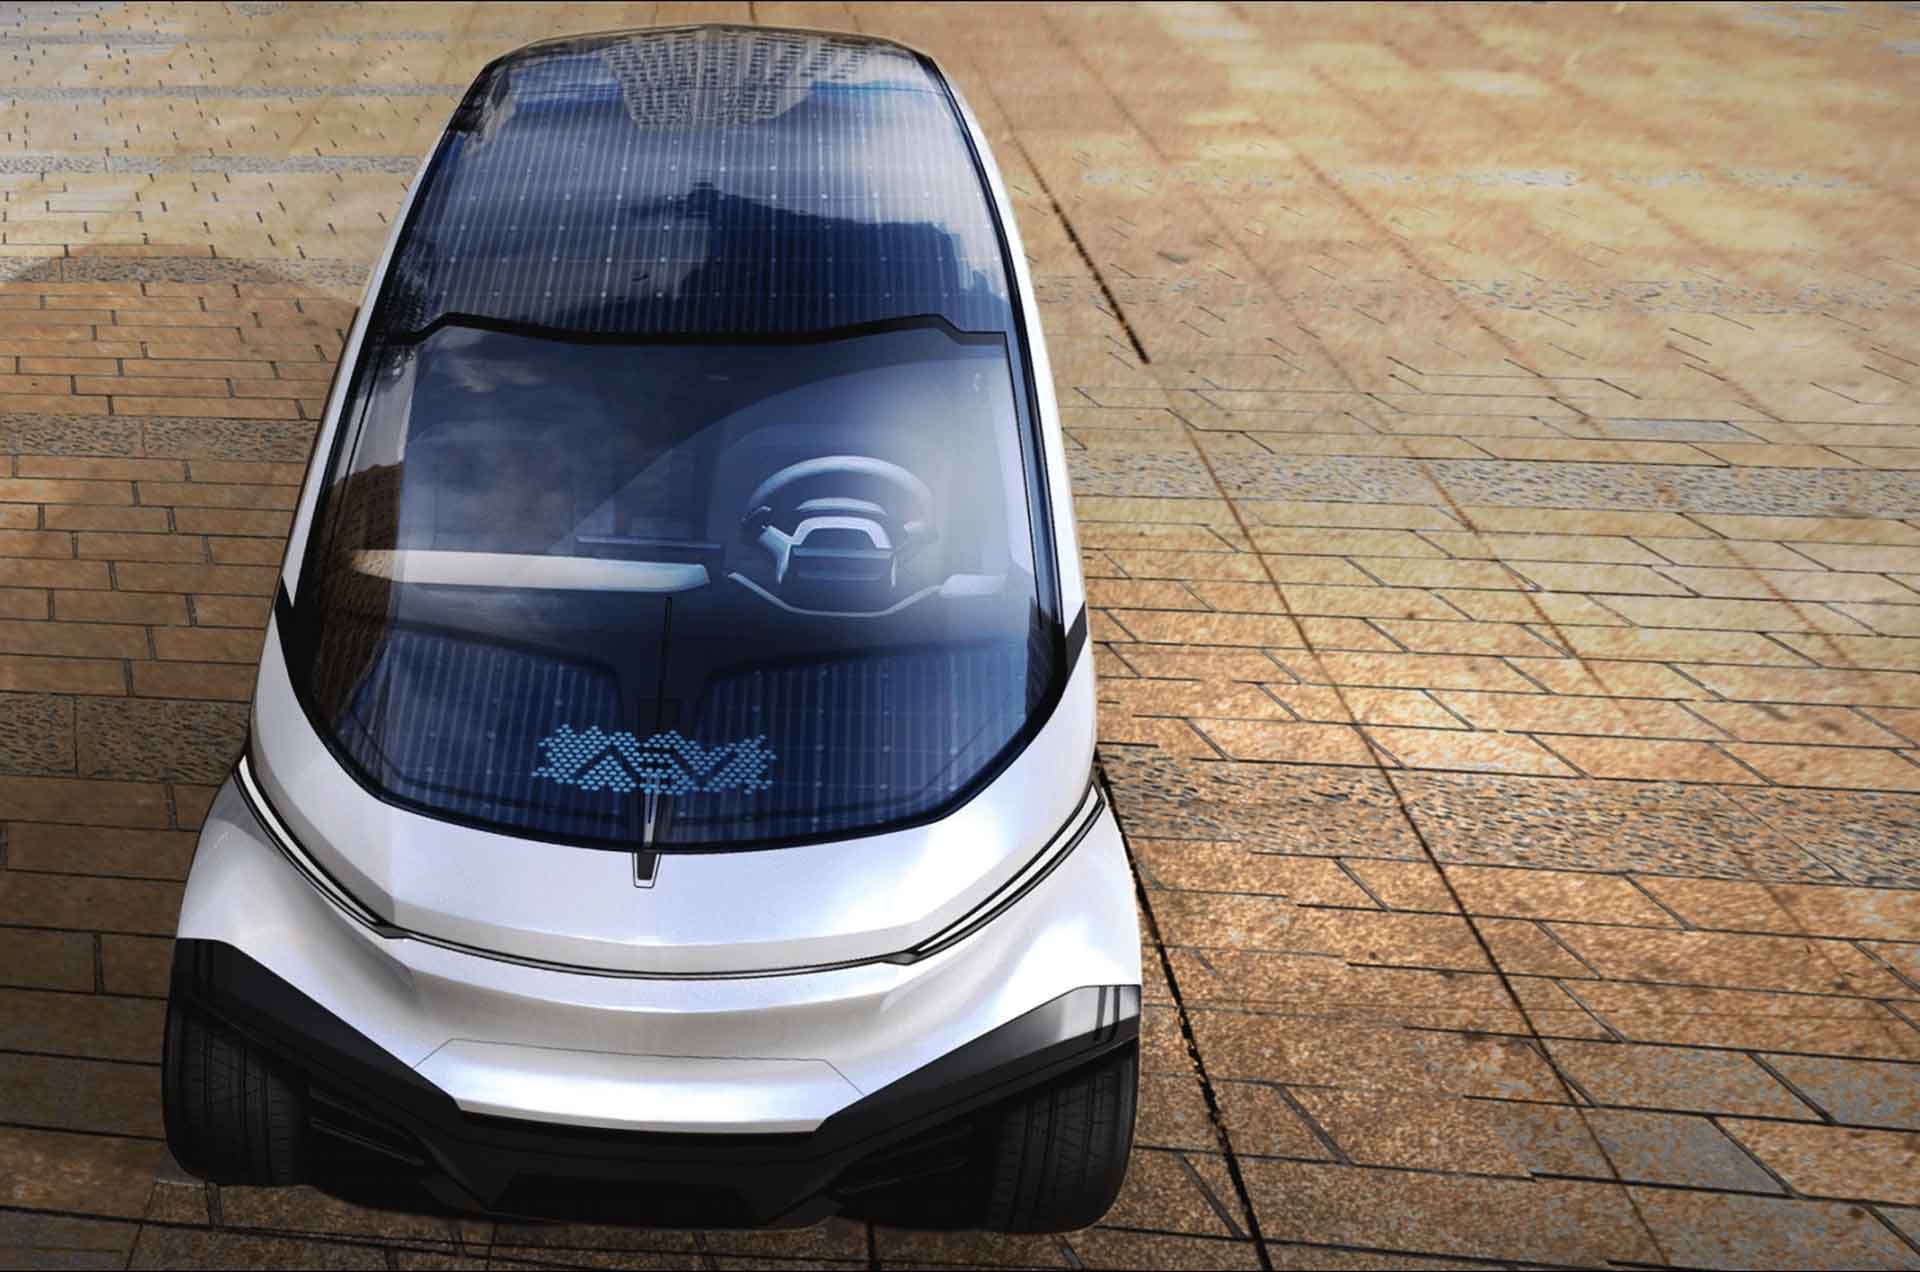 Image - Freedom solar electric vehicle front view